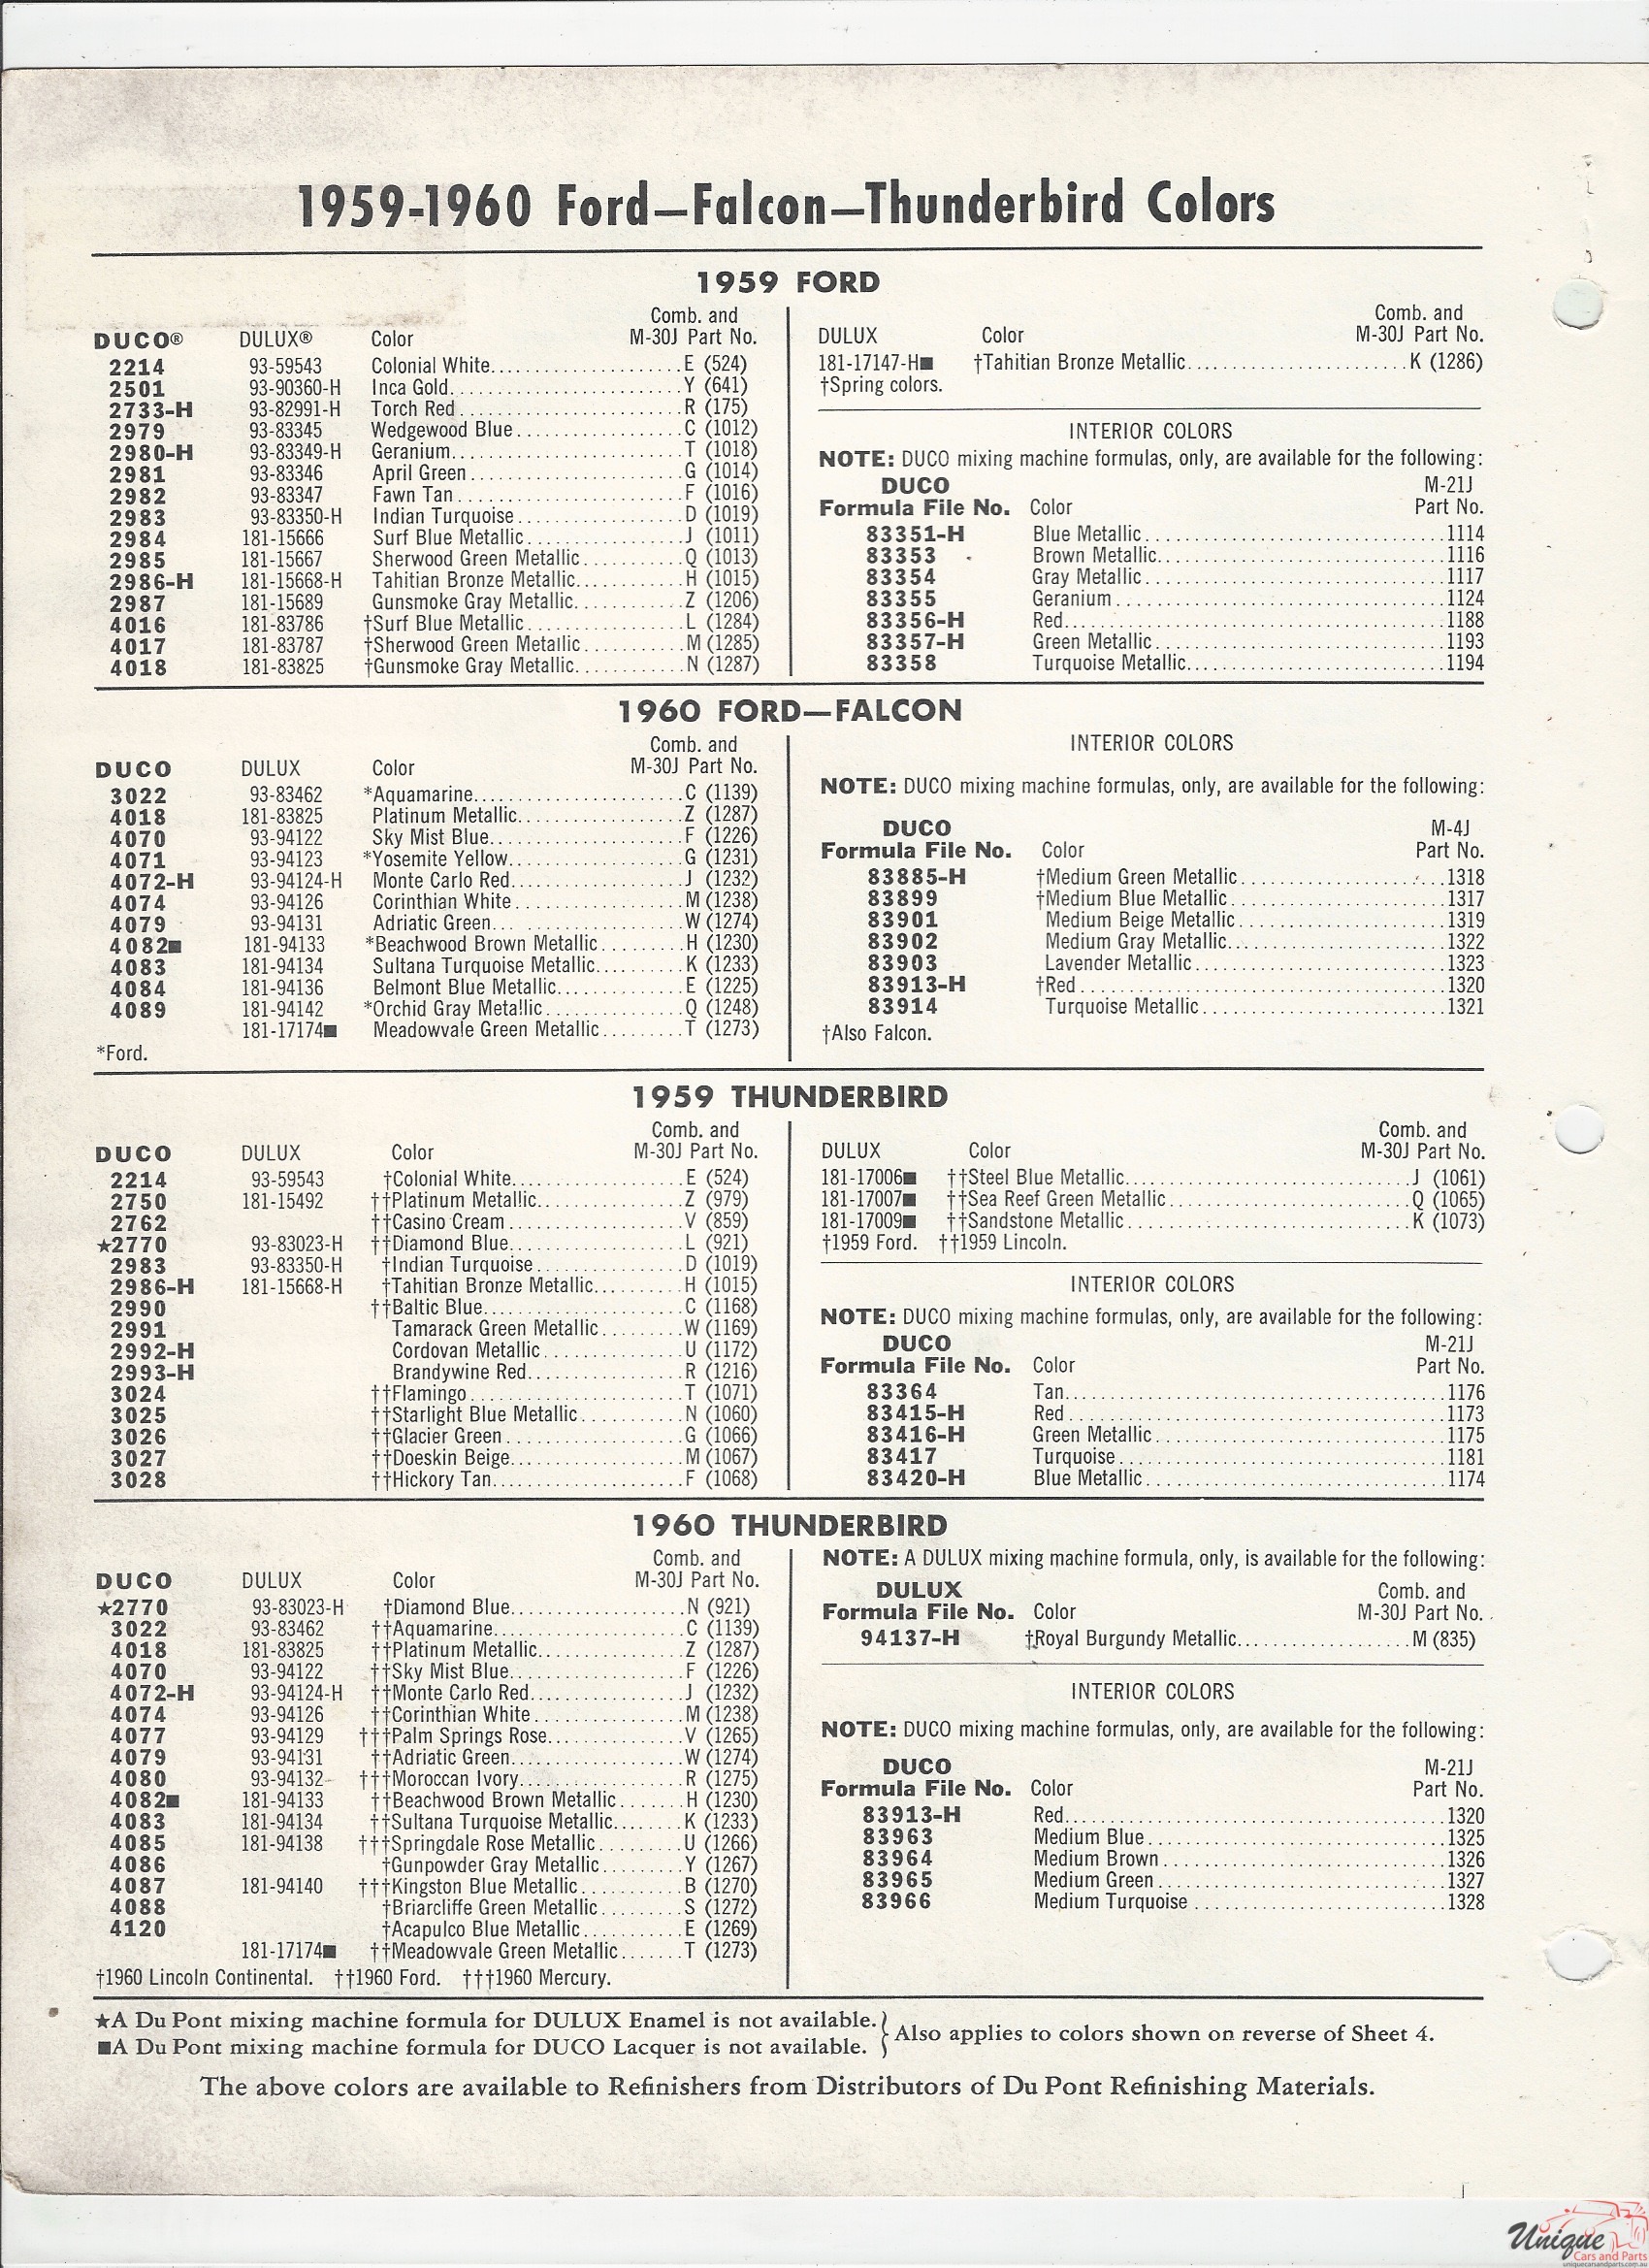 1961 Ford-6 Paint Charts